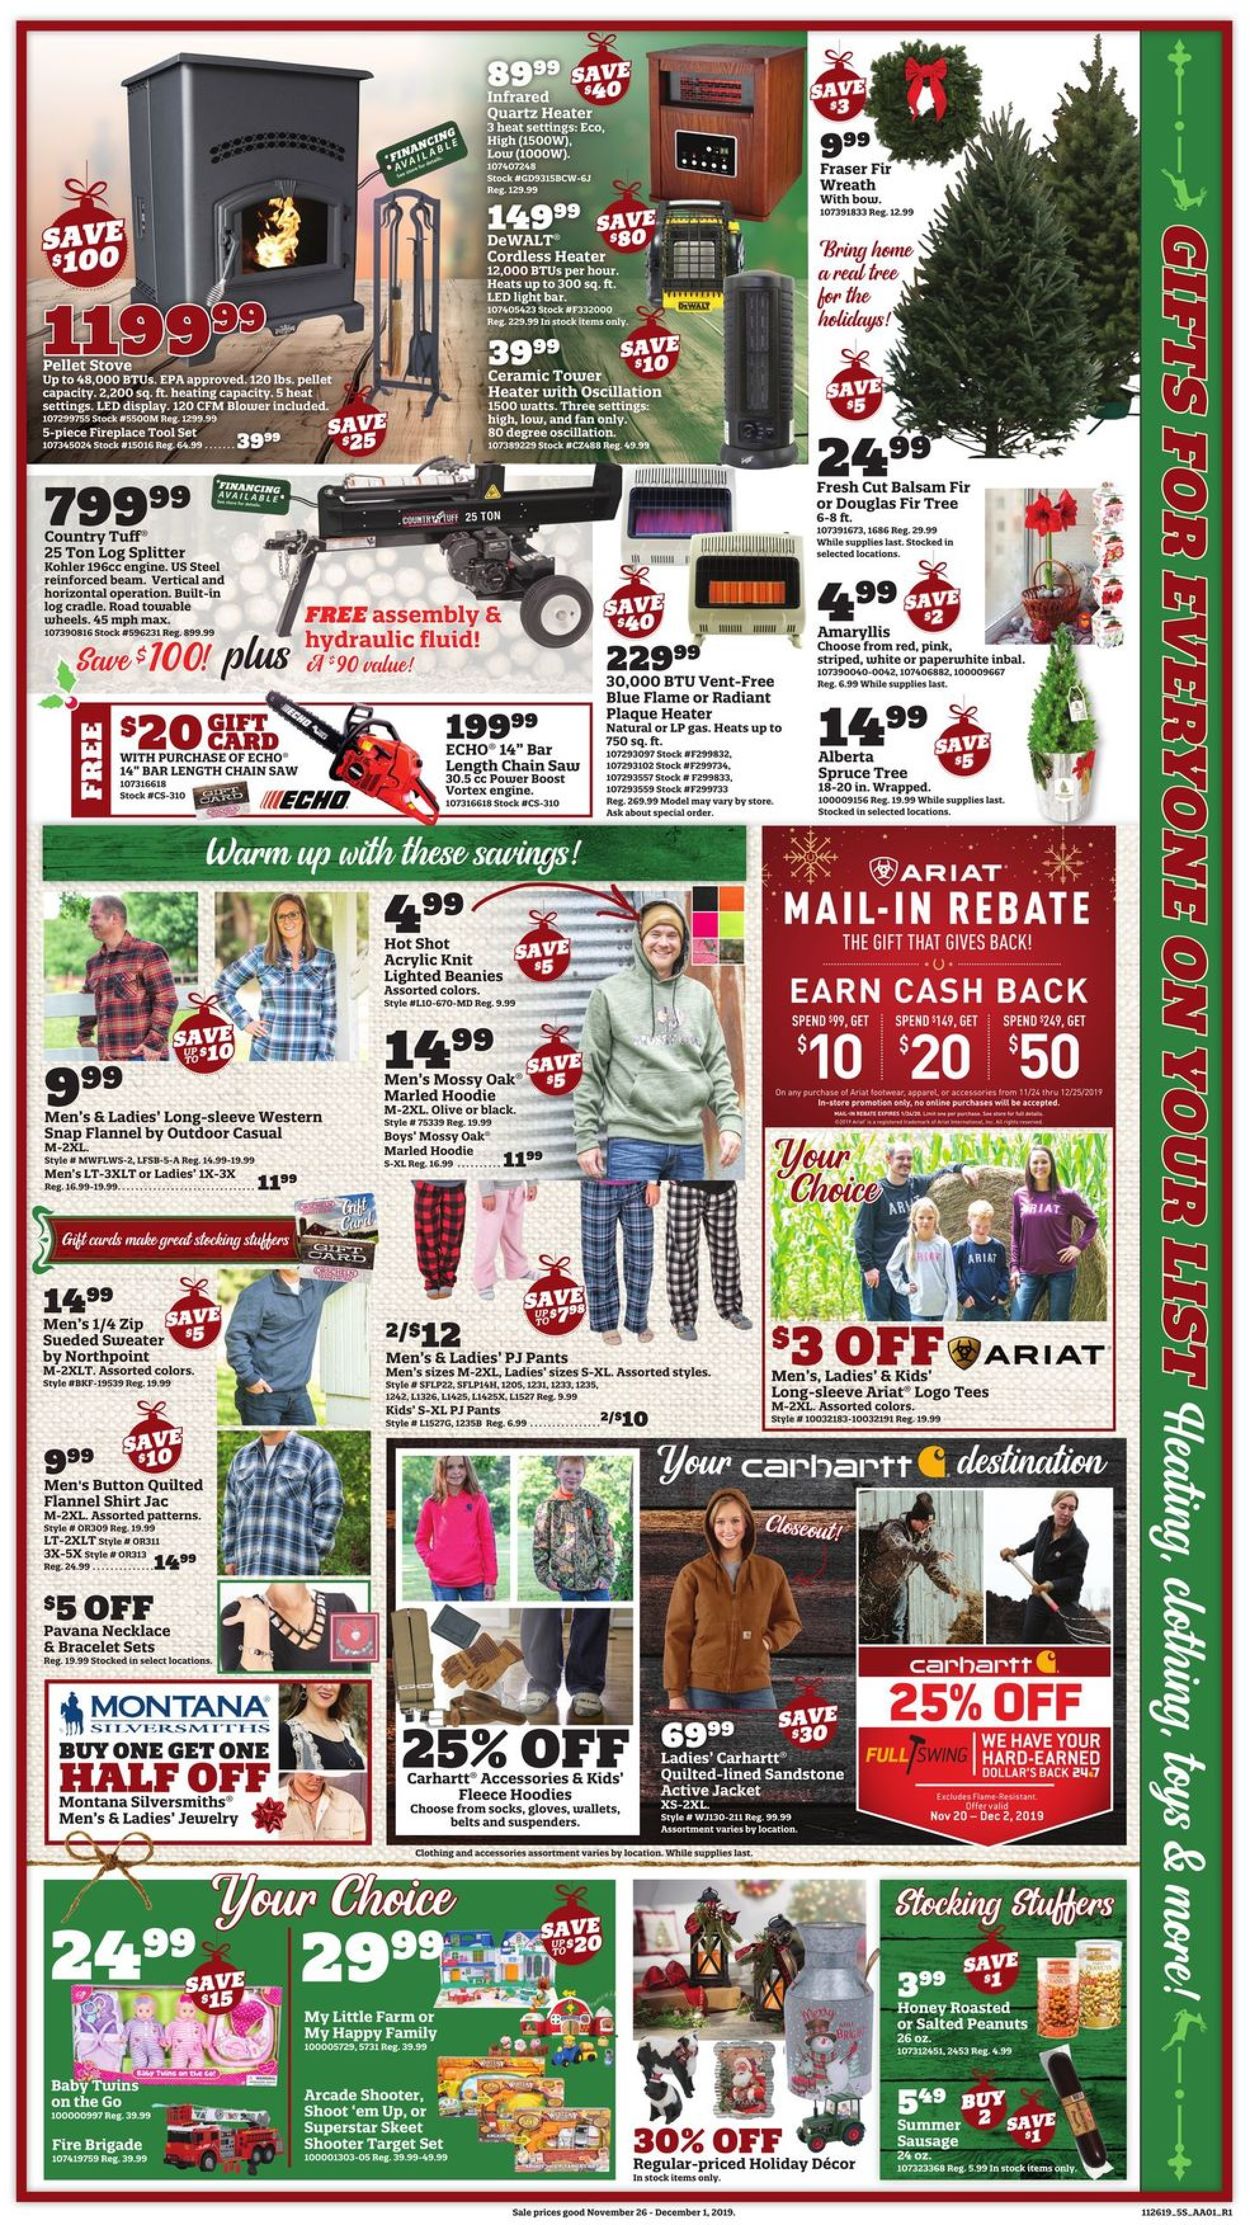 Orscheln Farm and Home - Black Friday Ad 2019 Weekly Ad Circular - valid 11/26-12/01/2019 (Page 5)